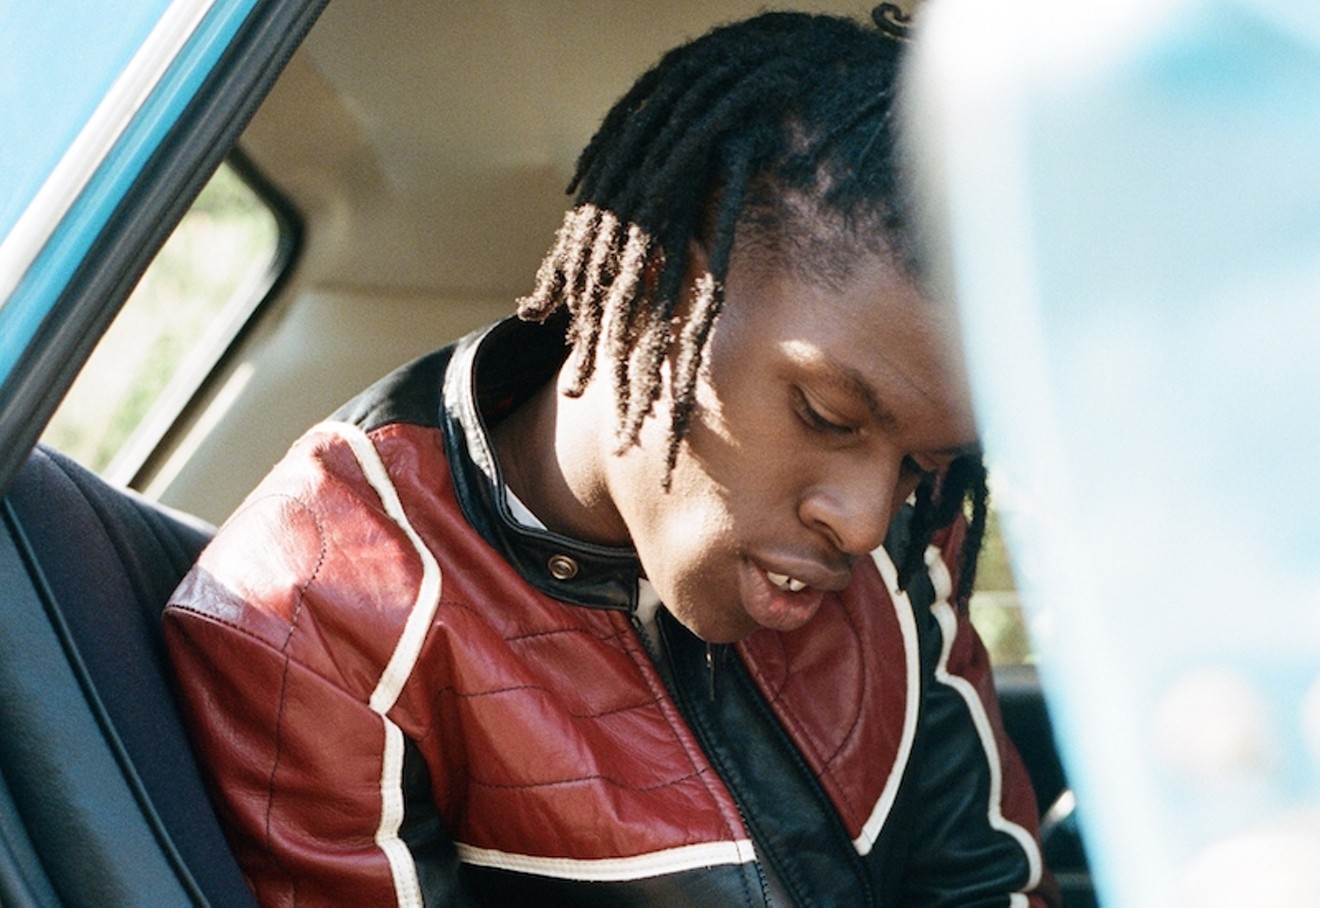 Daniel Caesar makes the kind of R&B you fall in love to.